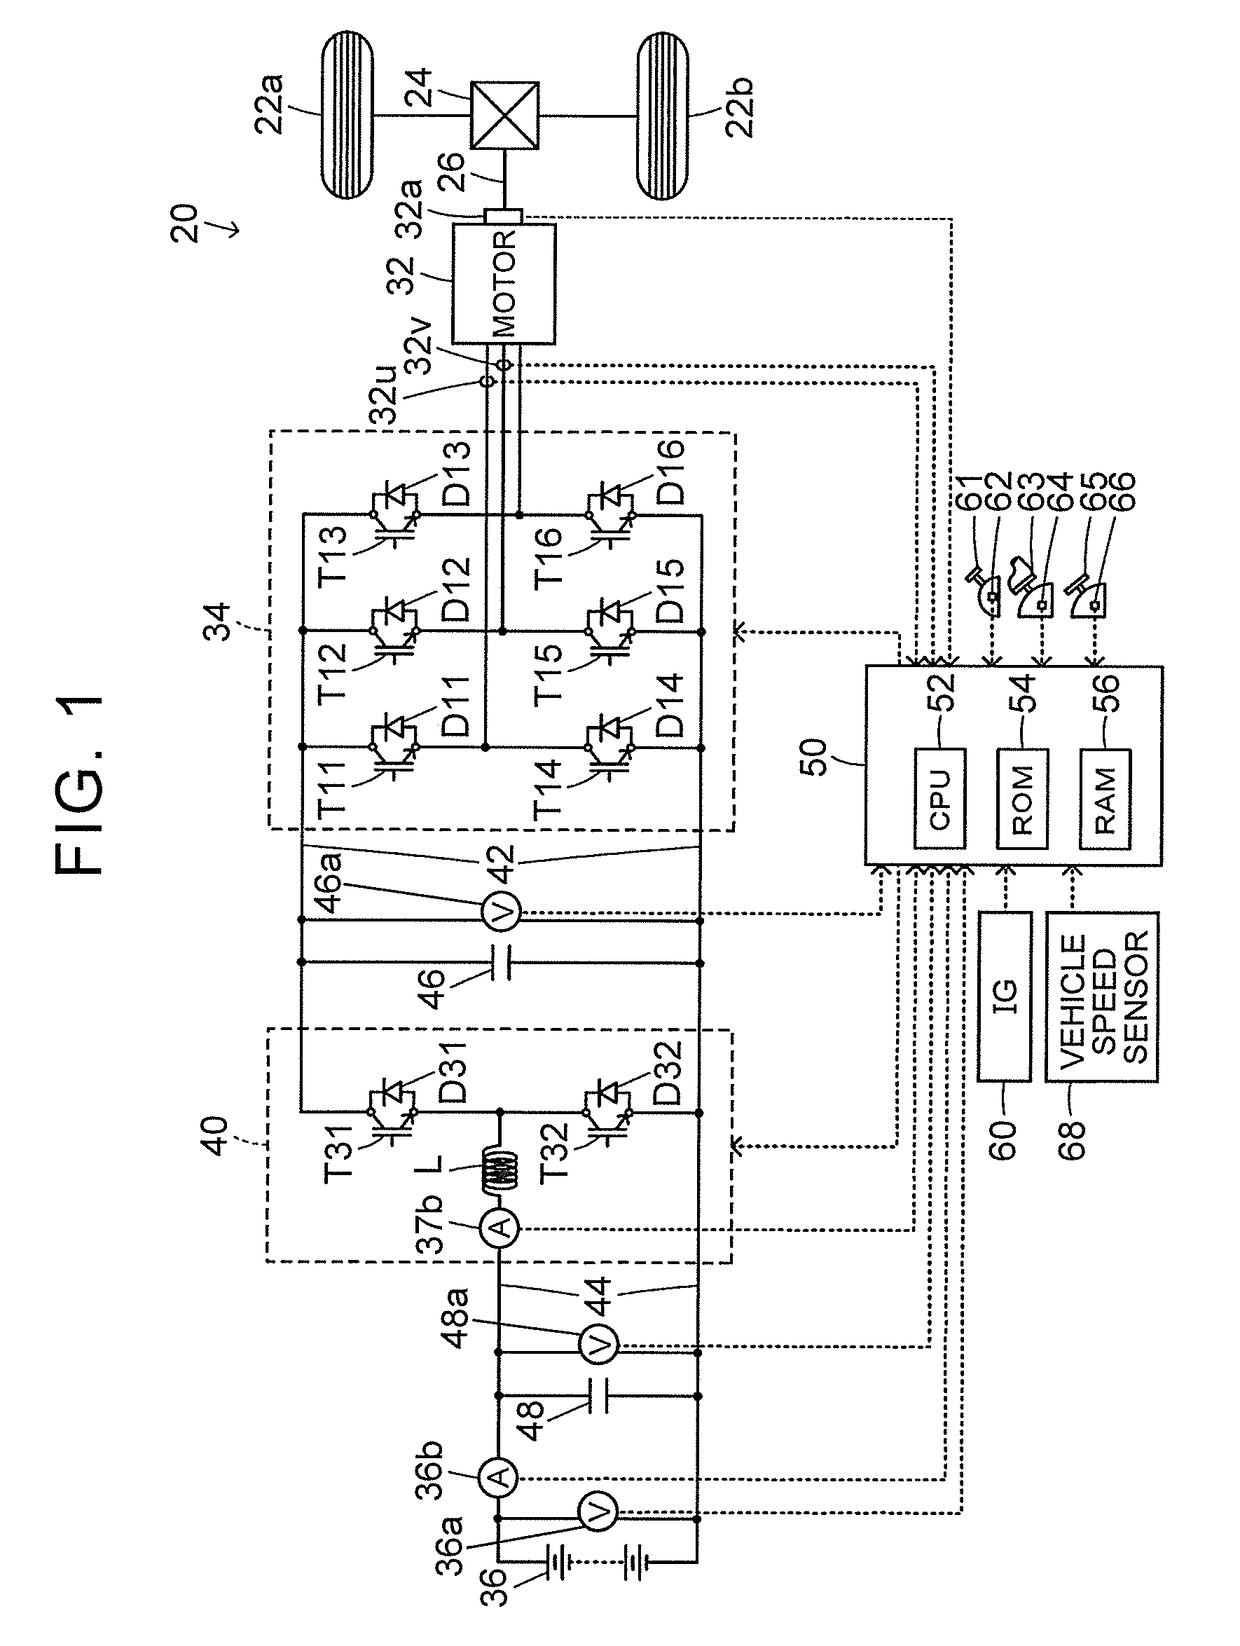 Vehicle including electronic control unit configured to control inverter